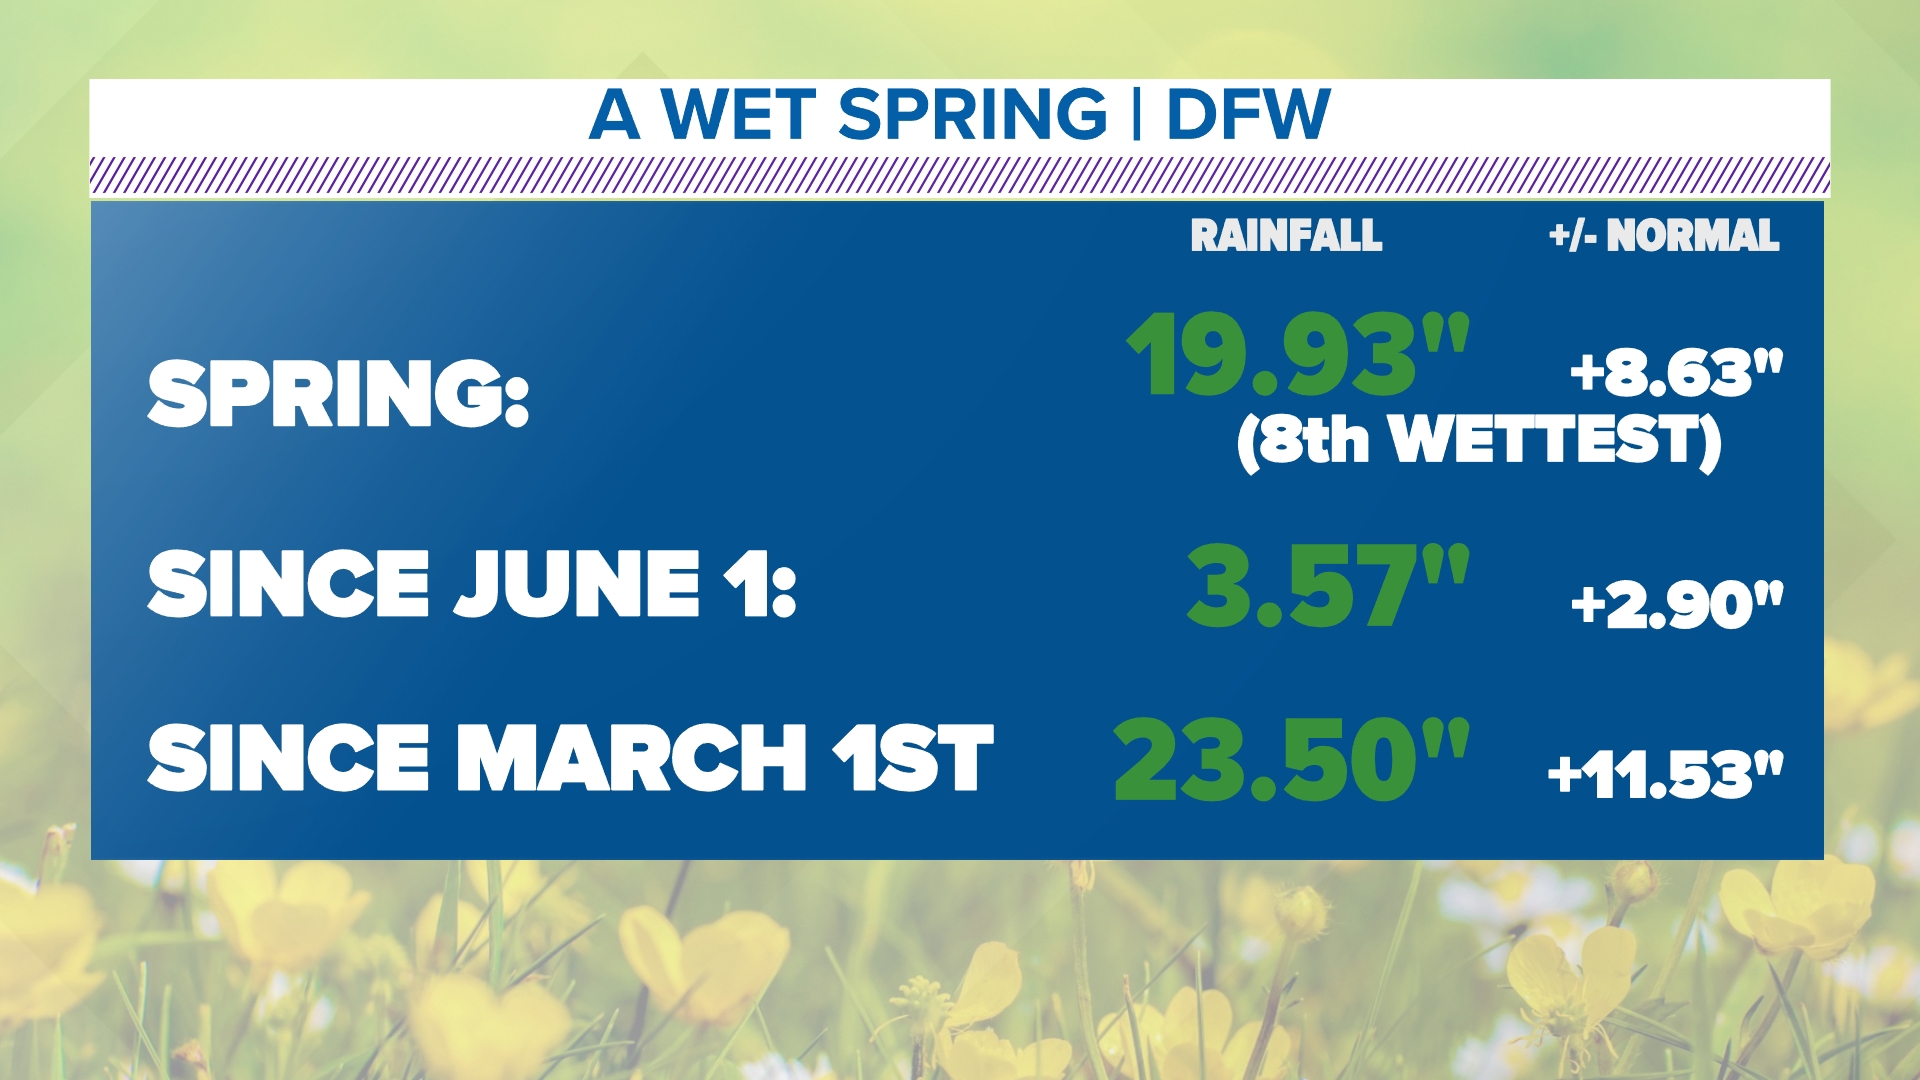 This spring was the 8th wettest on record, which could influence how hot it gets this summer.